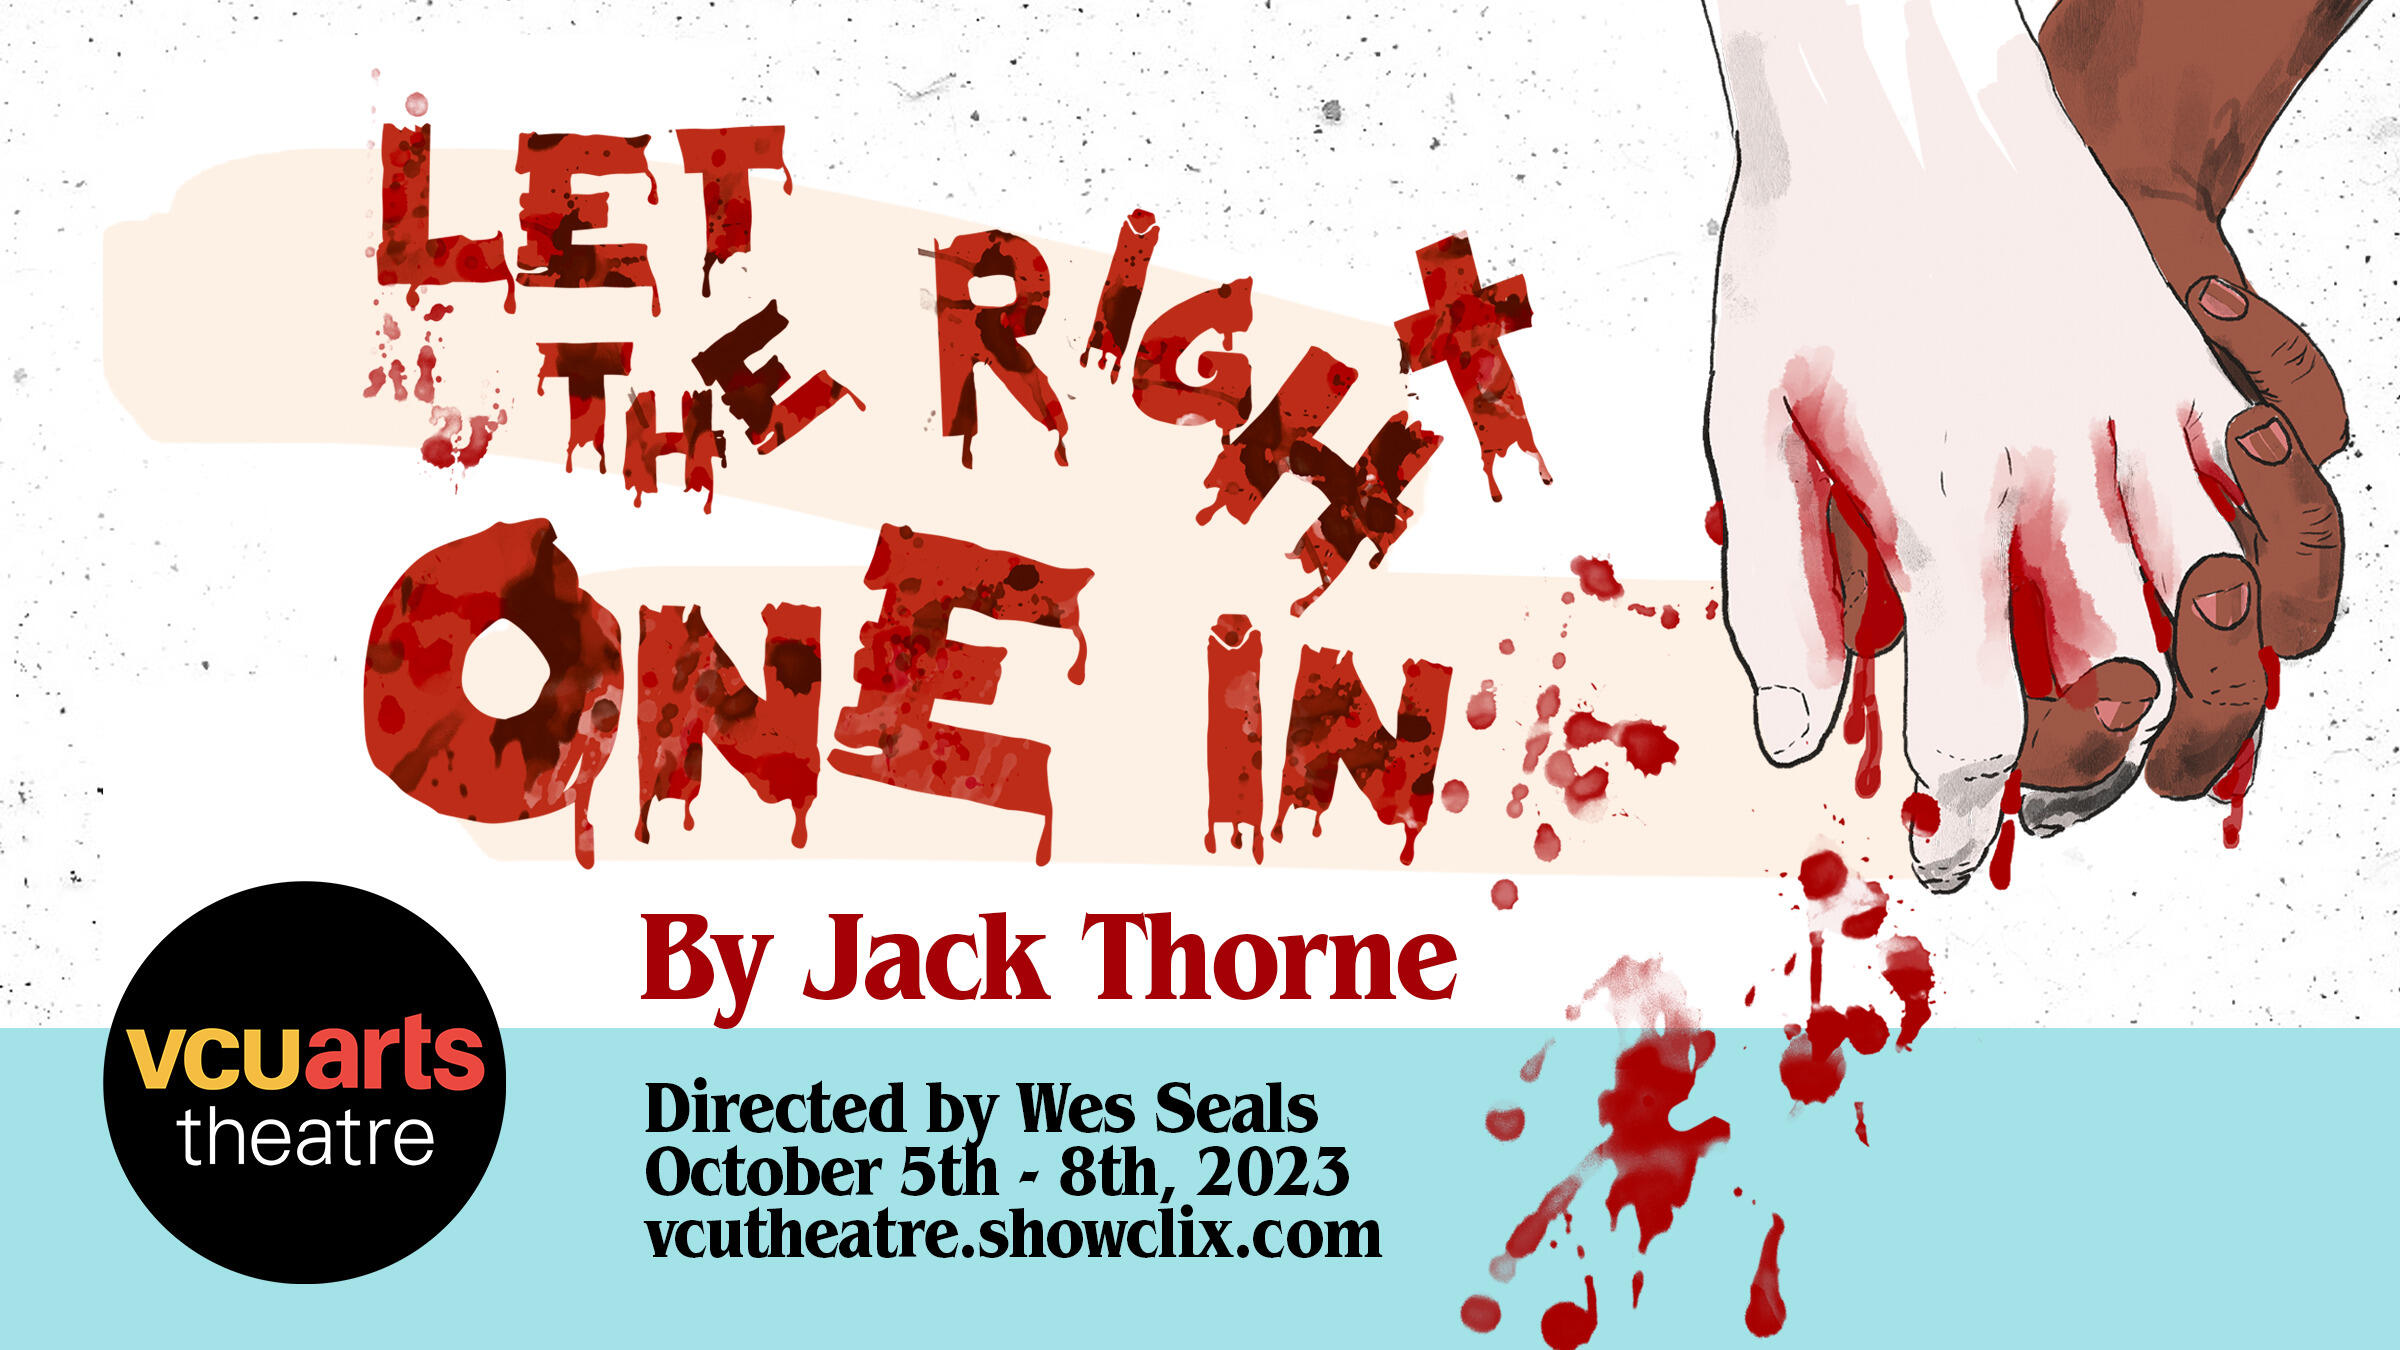 A an illustration of two hands holding eachother with blood splattered belowe them. In red text is the phrase \"LET THE RIGHT ONE IN By Jack Thorne.\" Under that in black text is the phrase \"Directed by Wes Seals Octovber 5th - 8th, 2023 vcutheater.showclix.com\" 